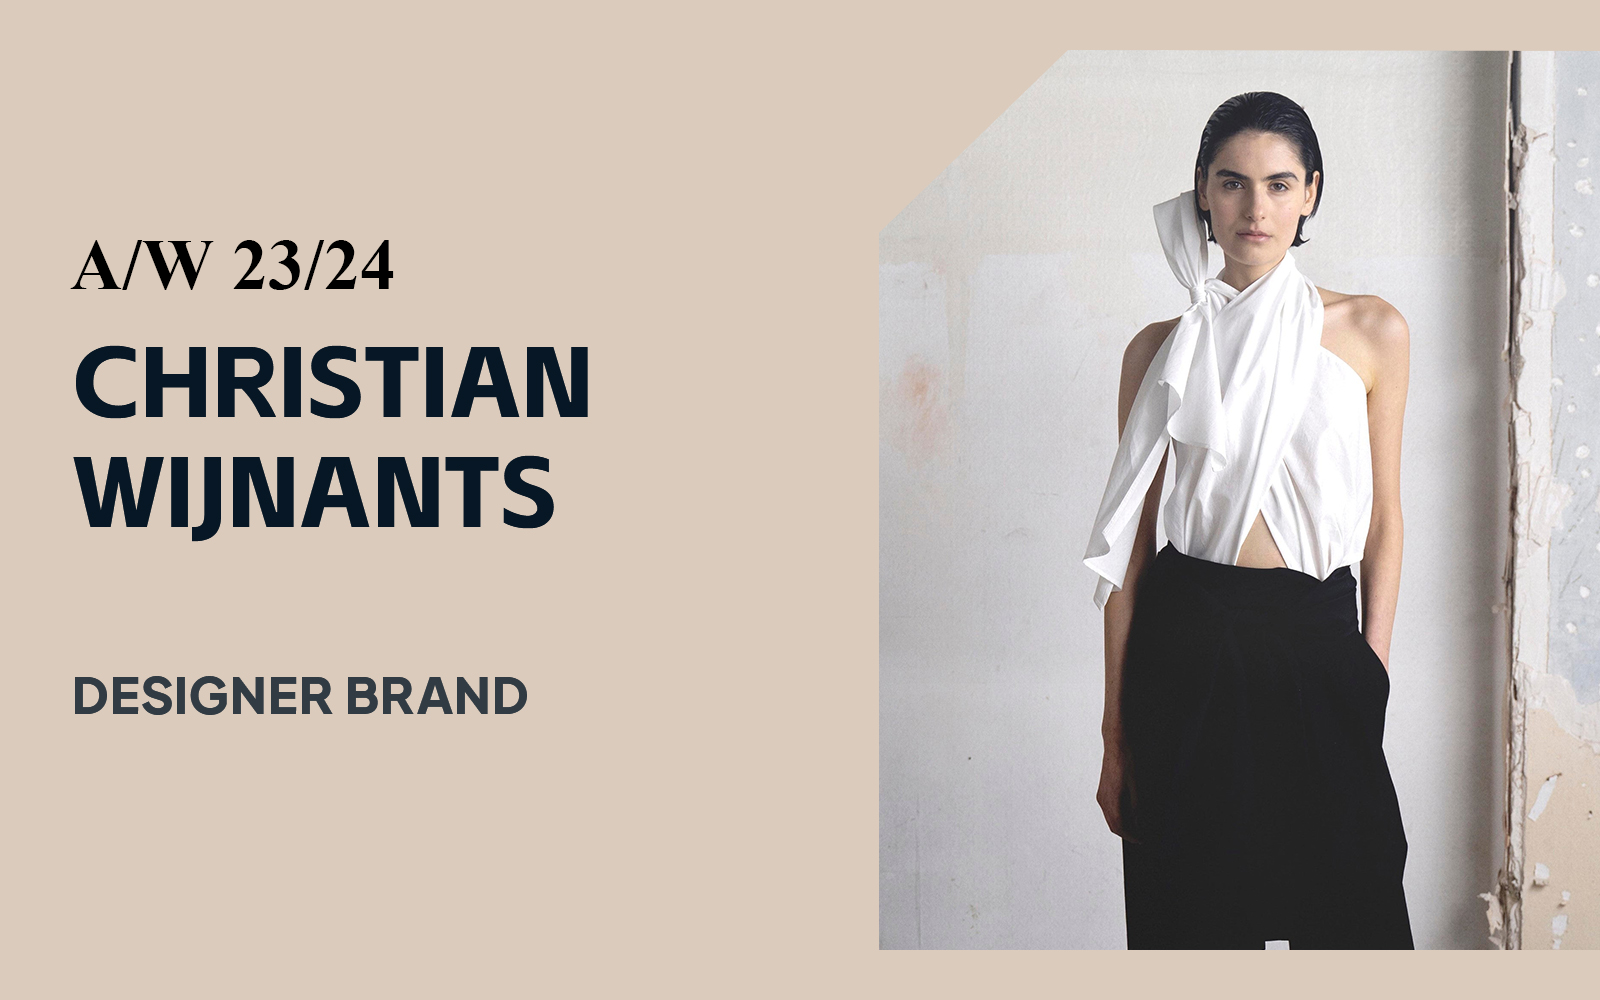 Nostalgic and Sexy -- The Analysis of Christian Wijnants The Womenswear Designer Brand